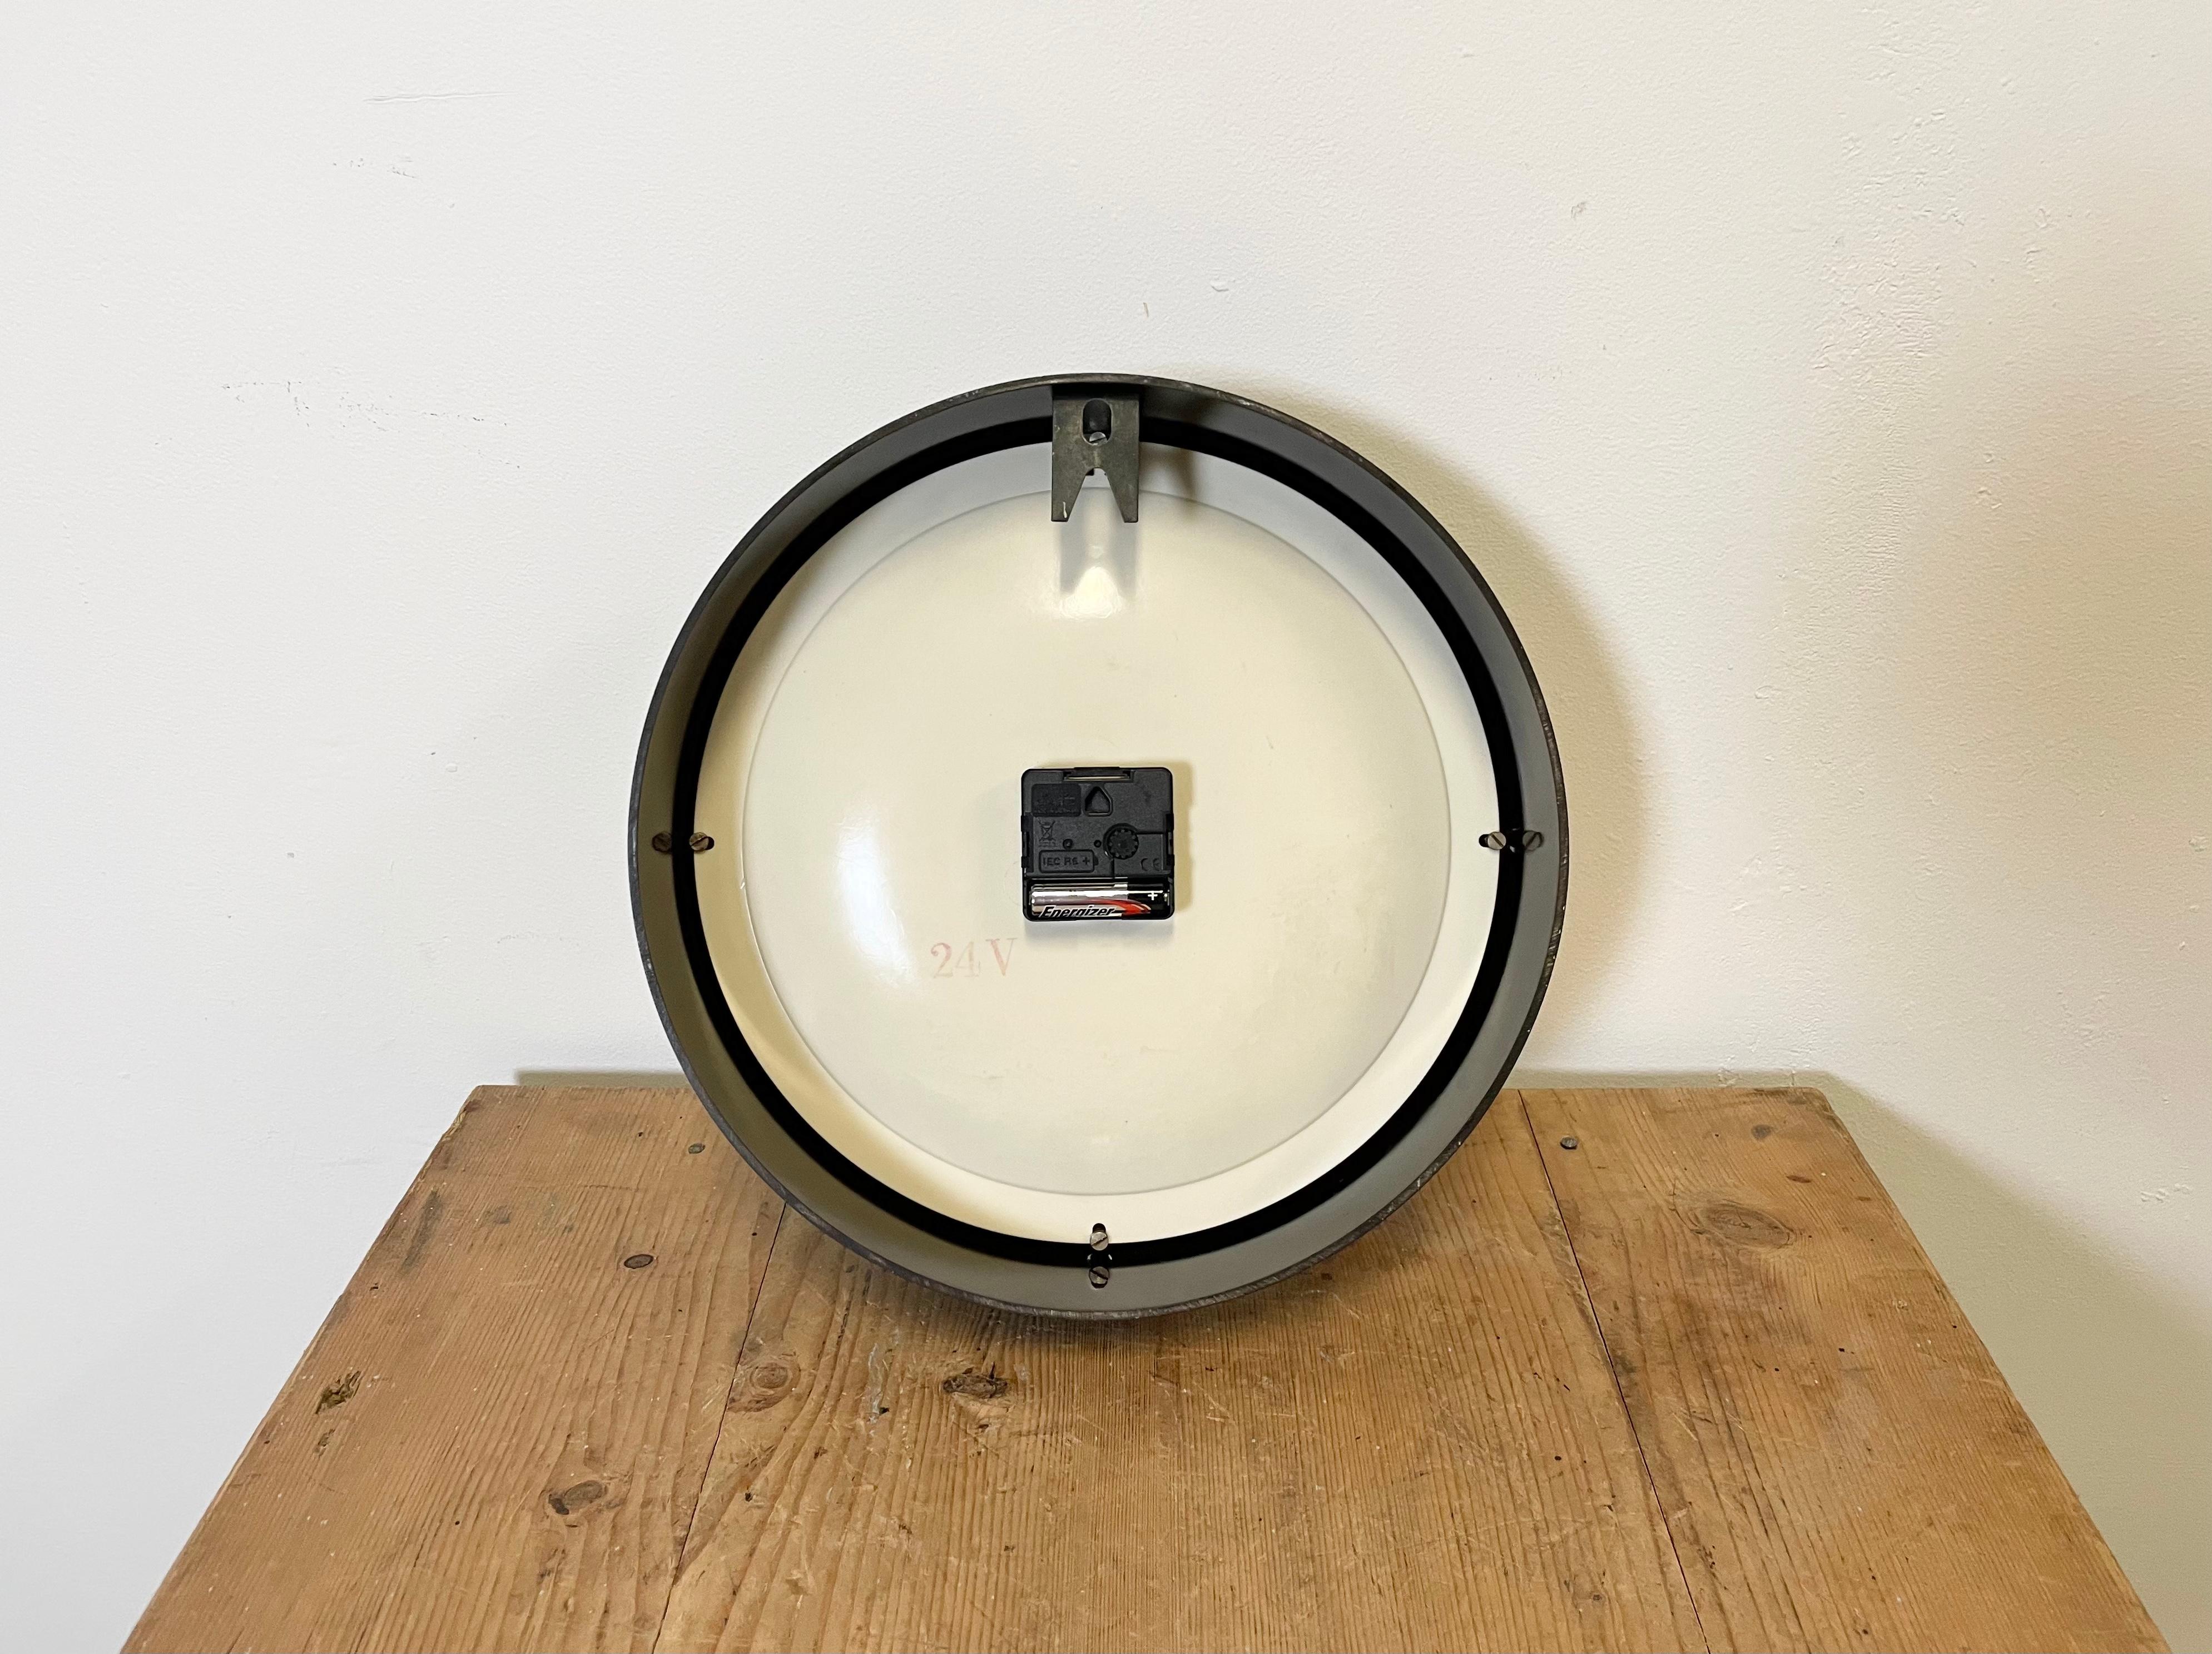 Glass Industrial Bakelite Factory Wall Clock from Pragotron, 1960s For Sale